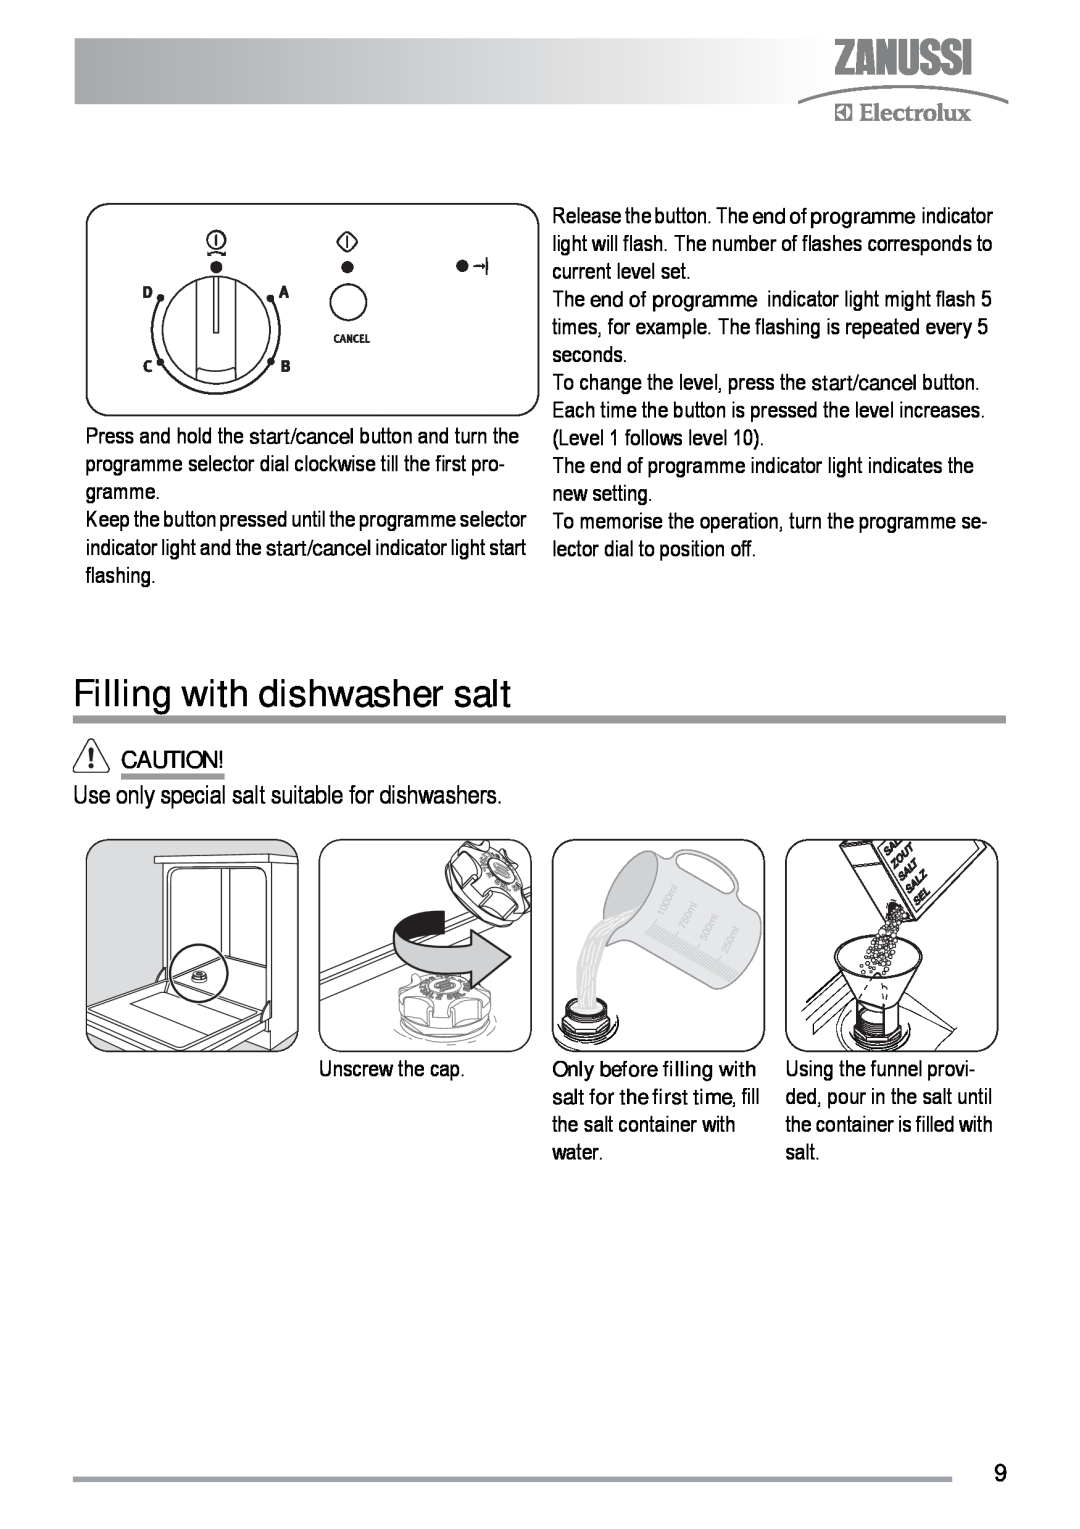 Zanussi ZDF 131 manual Filling with dishwasher salt, Use only special salt suitable for dishwashers, Unscrew the cap, water 